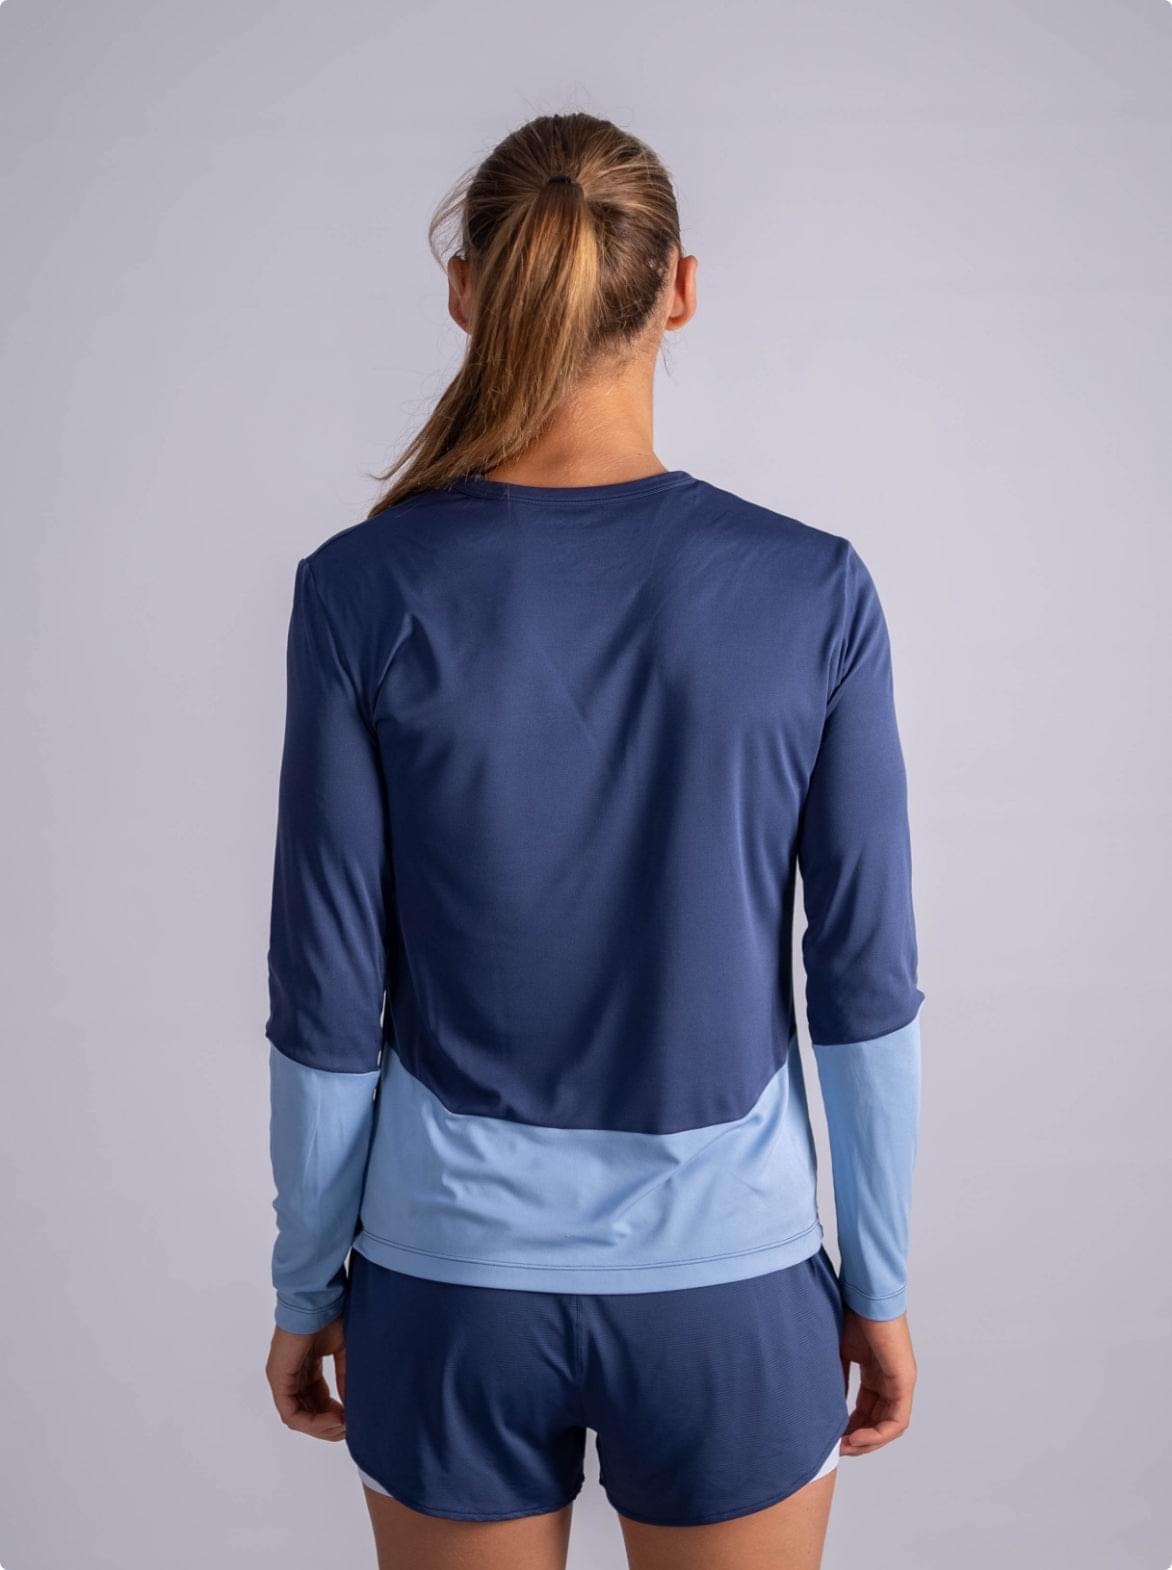 Women's Long Sleeves Running T-Shirt Made in France and Recycled — TOULON